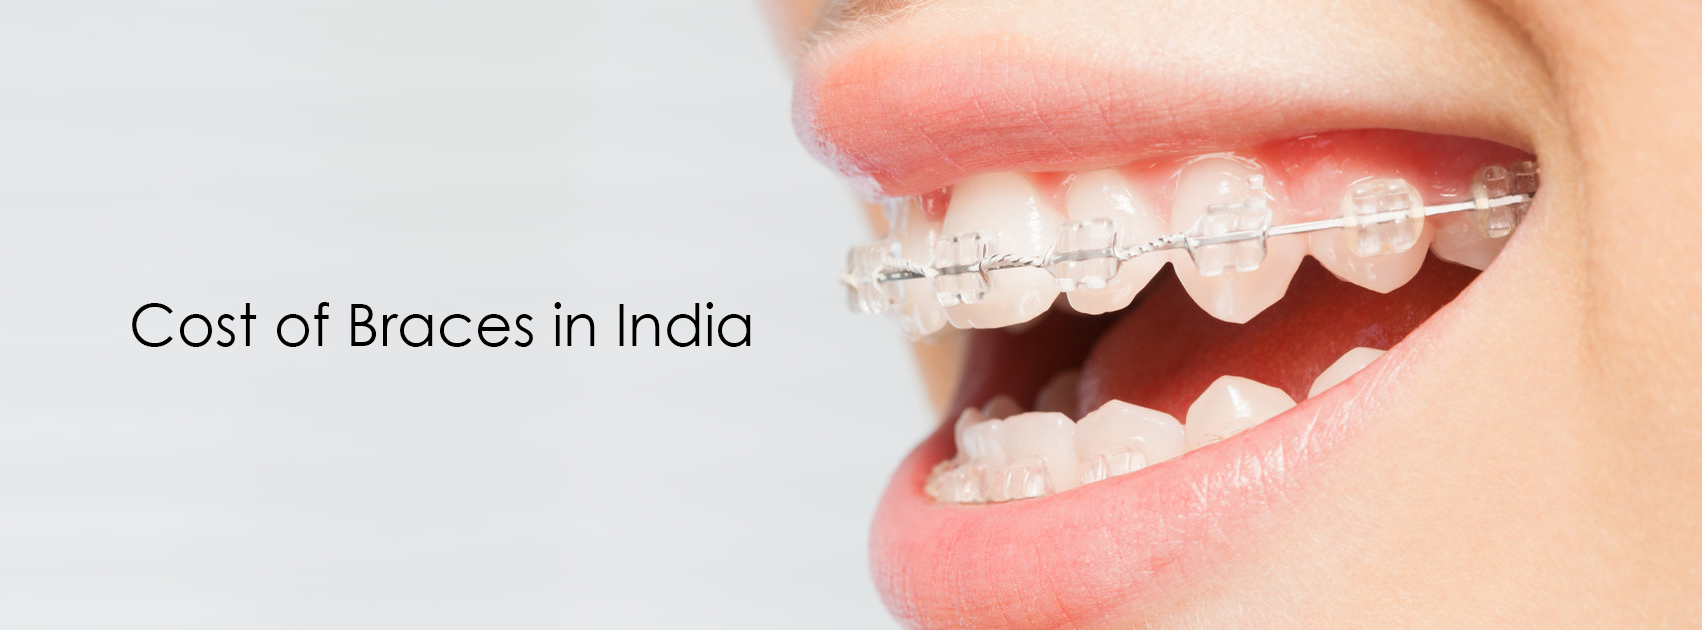 cost-of-braces-in-india